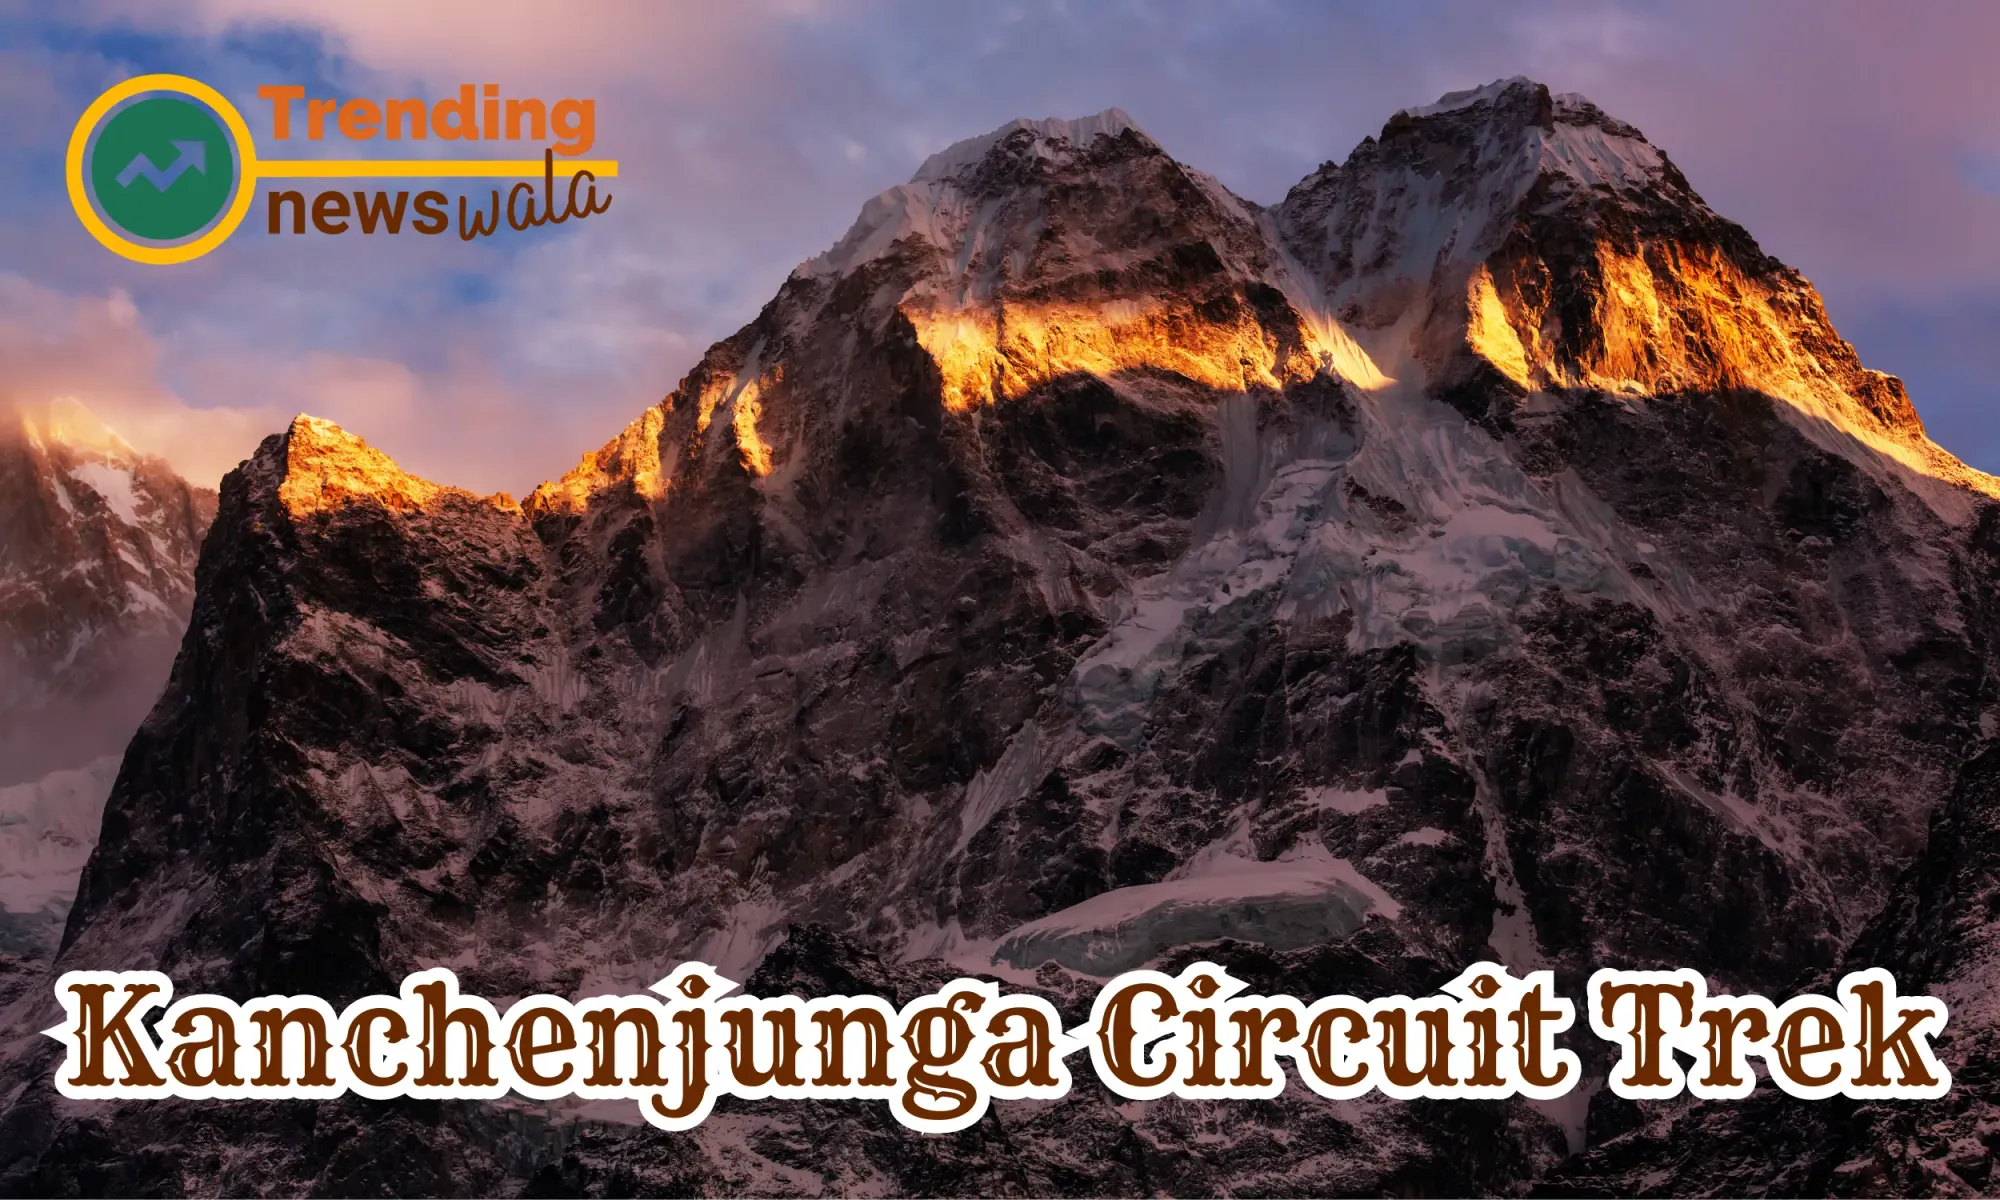 The Kanchenjunga Circuit Trek is a spectacular and challenging trek